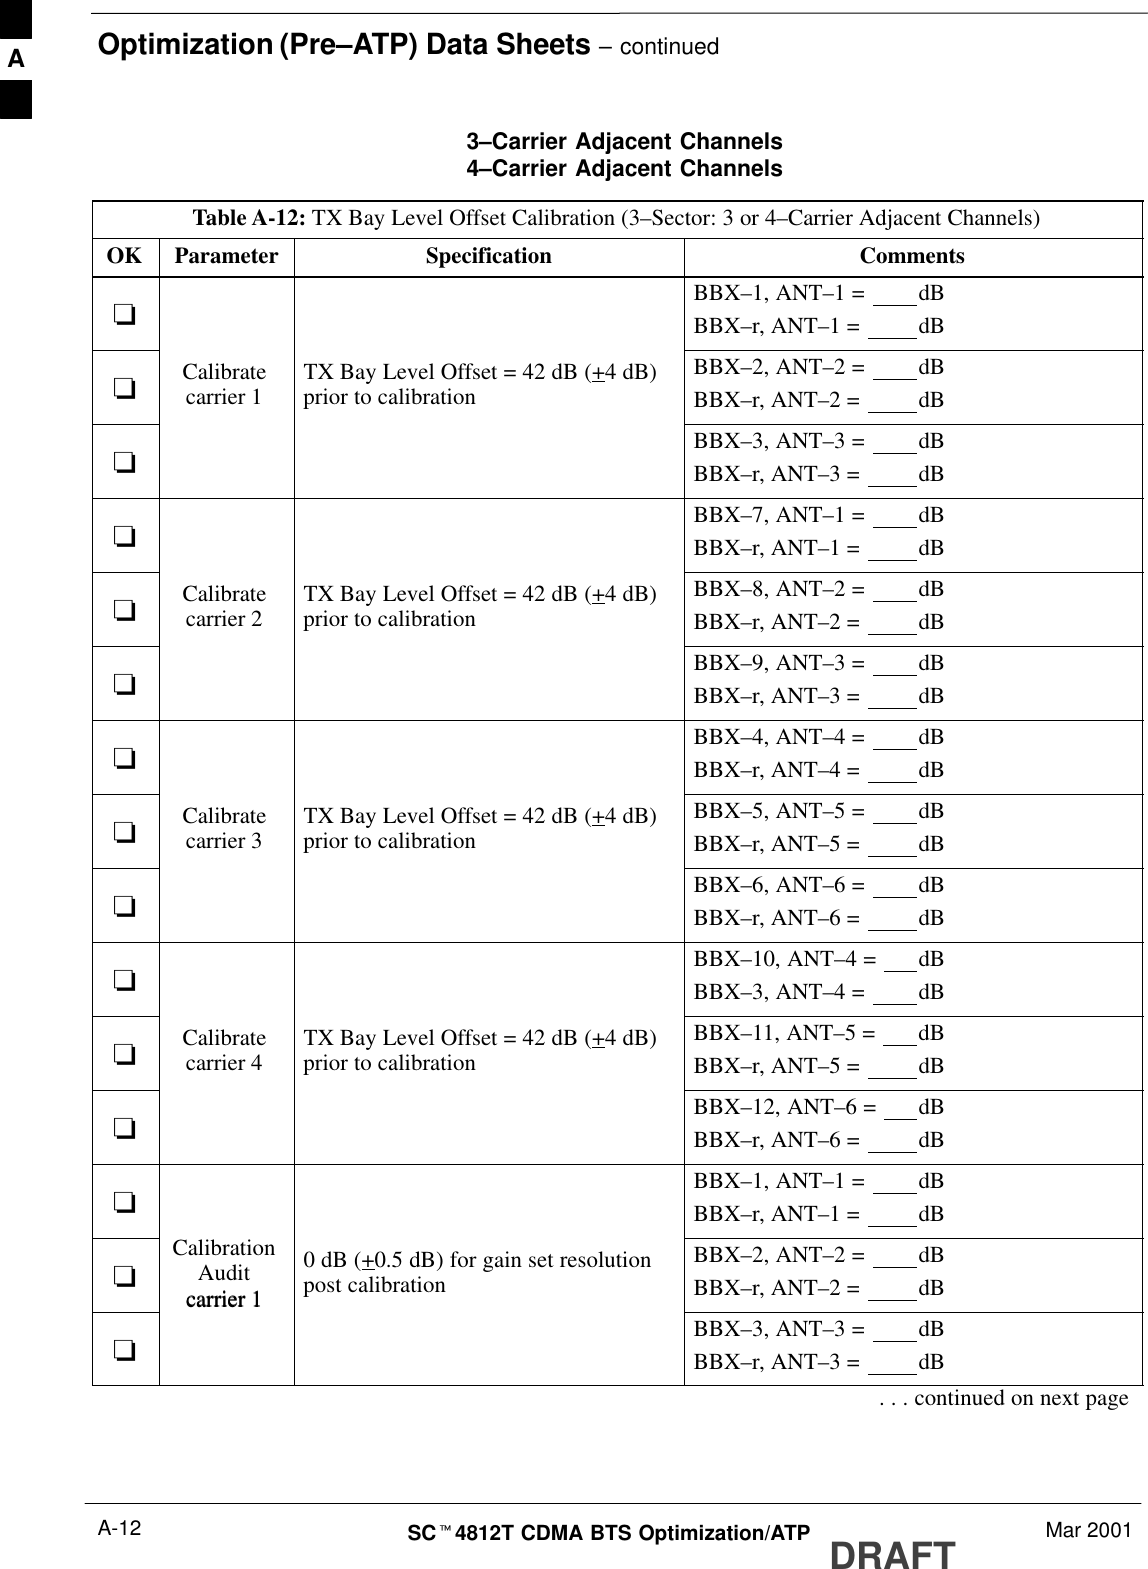 Optimization (Pre–ATP) Data Sheets – continuedDRAFTSCt4812T CDMA BTS Optimization/ATP Mar 2001A-123–Carrier Adjacent Channels4–Carrier Adjacent ChannelsTable A-12: TX Bay Level Offset Calibration (3–Sector: 3 or 4–Carrier Adjacent Channels)OK Parameter Specification Comments-BBX–1, ANT–1 =  dBBBX–r, ANT–1 =  dB-Calibratecarrier 1 TX Bay Level Offset = 42 dB (+4 dB)prior to calibrationBBX–2, ANT–2 =  dBBBX–r, ANT–2 =  dB-BBX–3, ANT–3 =  dBBBX–r, ANT–3 =  dB-BBX–7, ANT–1 =  dBBBX–r, ANT–1 =  dB-Calibratecarrier 2 TX Bay Level Offset = 42 dB (+4 dB)prior to calibrationBBX–8, ANT–2 =  dBBBX–r, ANT–2 =  dB-BBX–9, ANT–3 =  dBBBX–r, ANT–3 =  dB-BBX–4, ANT–4 =  dBBBX–r, ANT–4 =  dB-Calibratecarrier 3 TX Bay Level Offset = 42 dB (+4 dB)prior to calibrationBBX–5, ANT–5 =  dBBBX–r, ANT–5 =  dB-BBX–6, ANT–6 =  dBBBX–r, ANT–6 =  dB-BBX–10, ANT–4 =  dBBBX–3, ANT–4 =  dB-Calibratecarrier 4 TX Bay Level Offset = 42 dB (+4 dB)prior to calibrationBBX–11, ANT–5 =  dBBBX–r, ANT–5 =  dB-BBX–12, ANT–6 =  dBBBX–r, ANT–6 =  dB-BBX–1, ANT–1 =  dBBBX–r, ANT–1 =  dB-CalibrationAuditcarrier 10 dB (+0.5 dB) for gain set resolutionpost calibrationBBX–2, ANT–2 =  dBBBX–r, ANT–2 =  dB-carrier 1BBX–3, ANT–3 =  dBBBX–r, ANT–3 =  dB. . . continued on next pageA